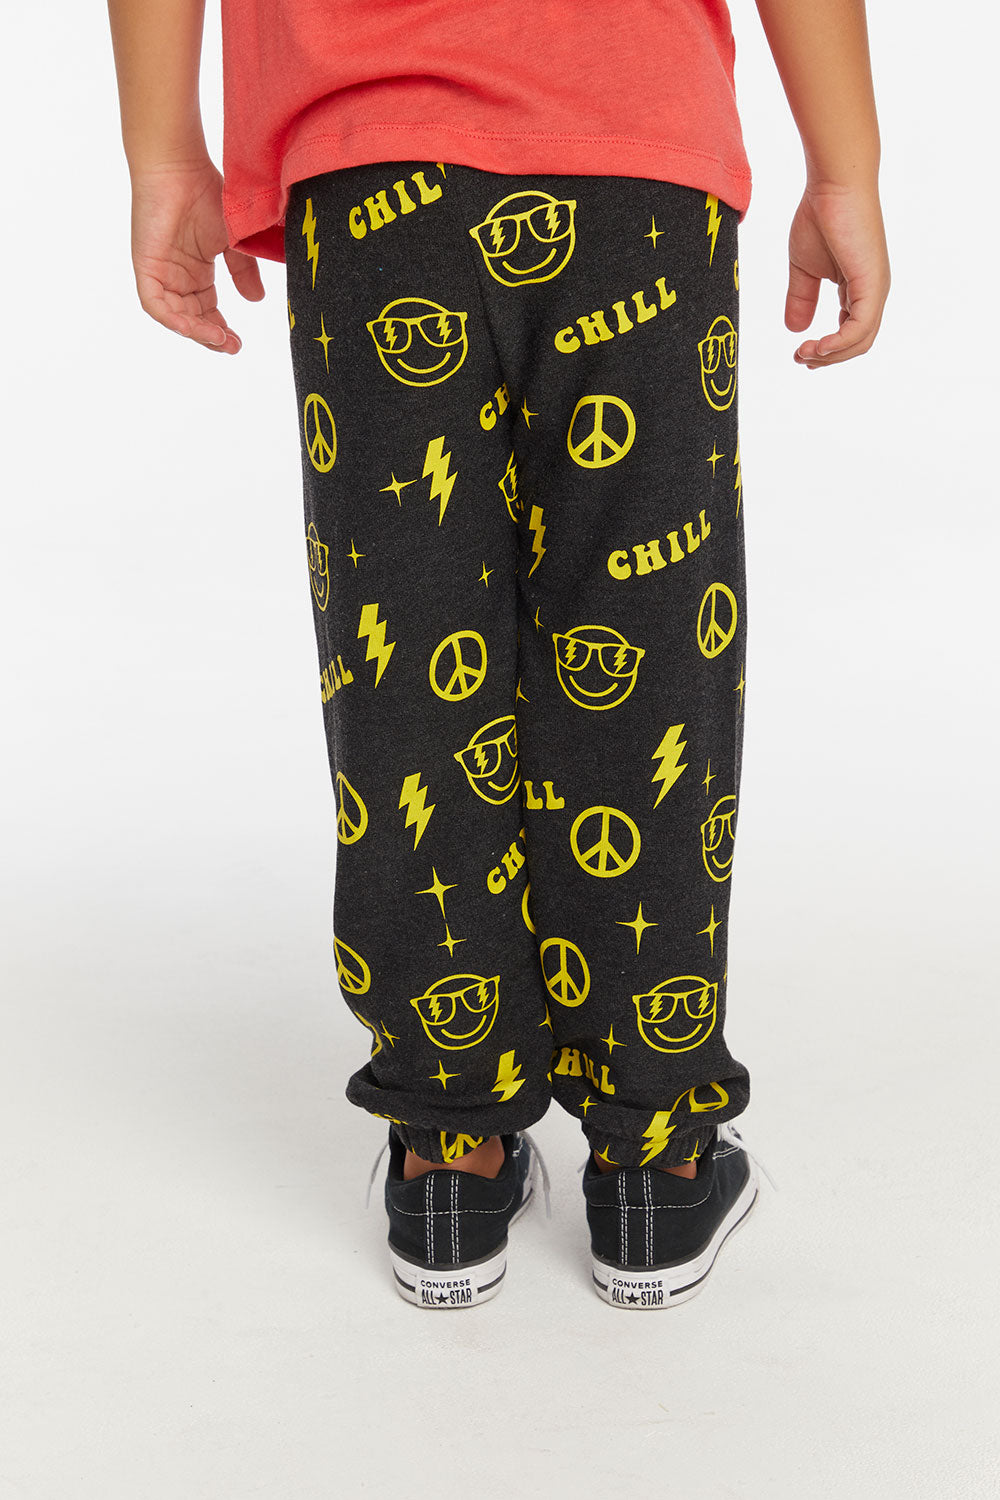 Chill Boys Pants Boys chaserbrand